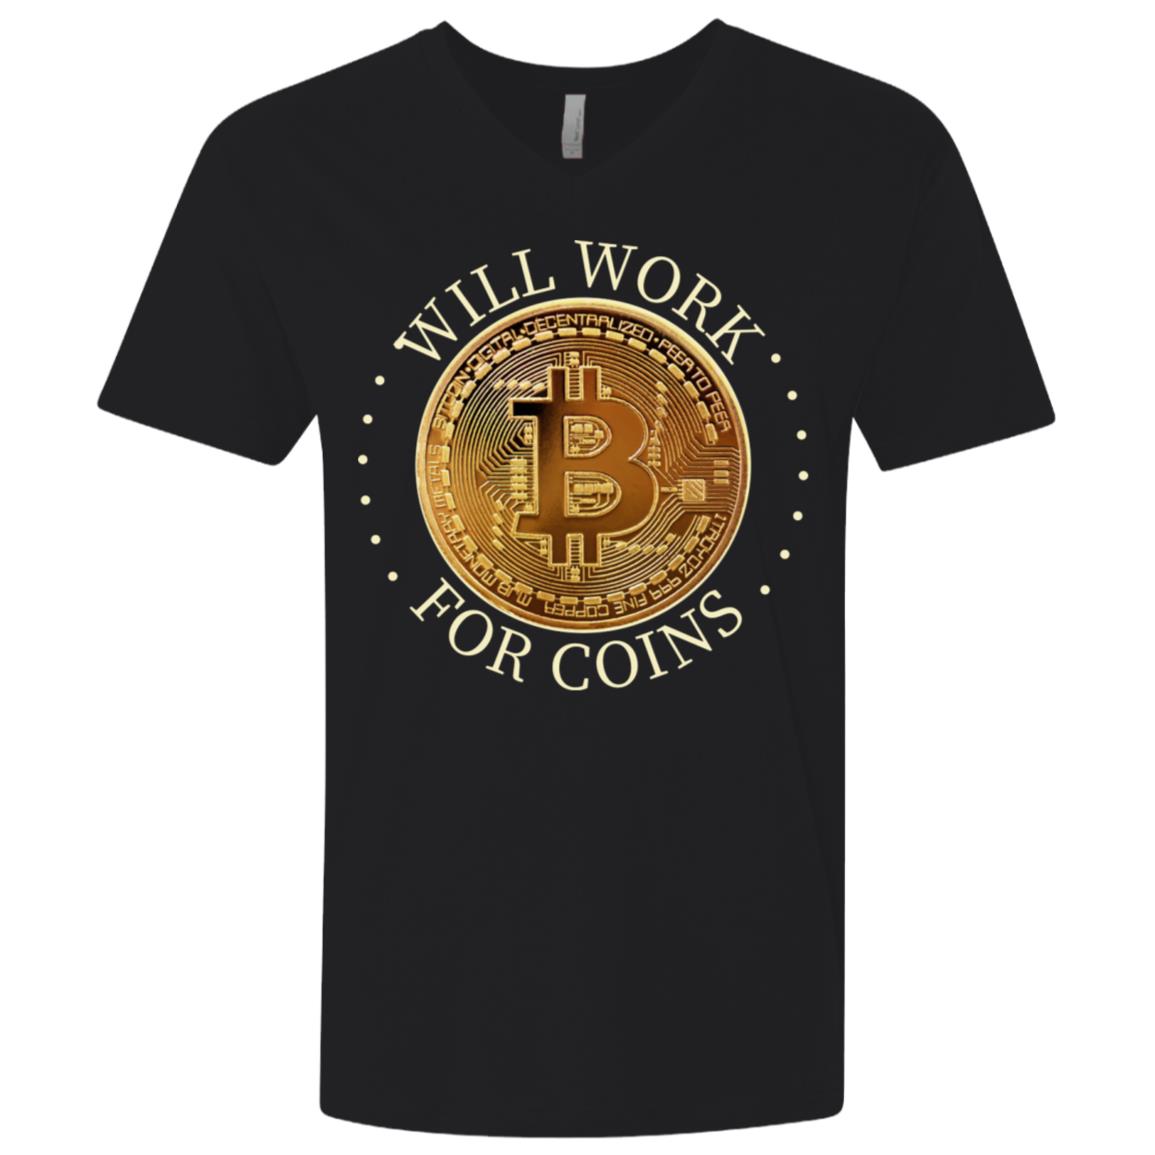 Bitcoin Shirt, Will Work For Coins, Men's Premium Fitted SS V-Neck